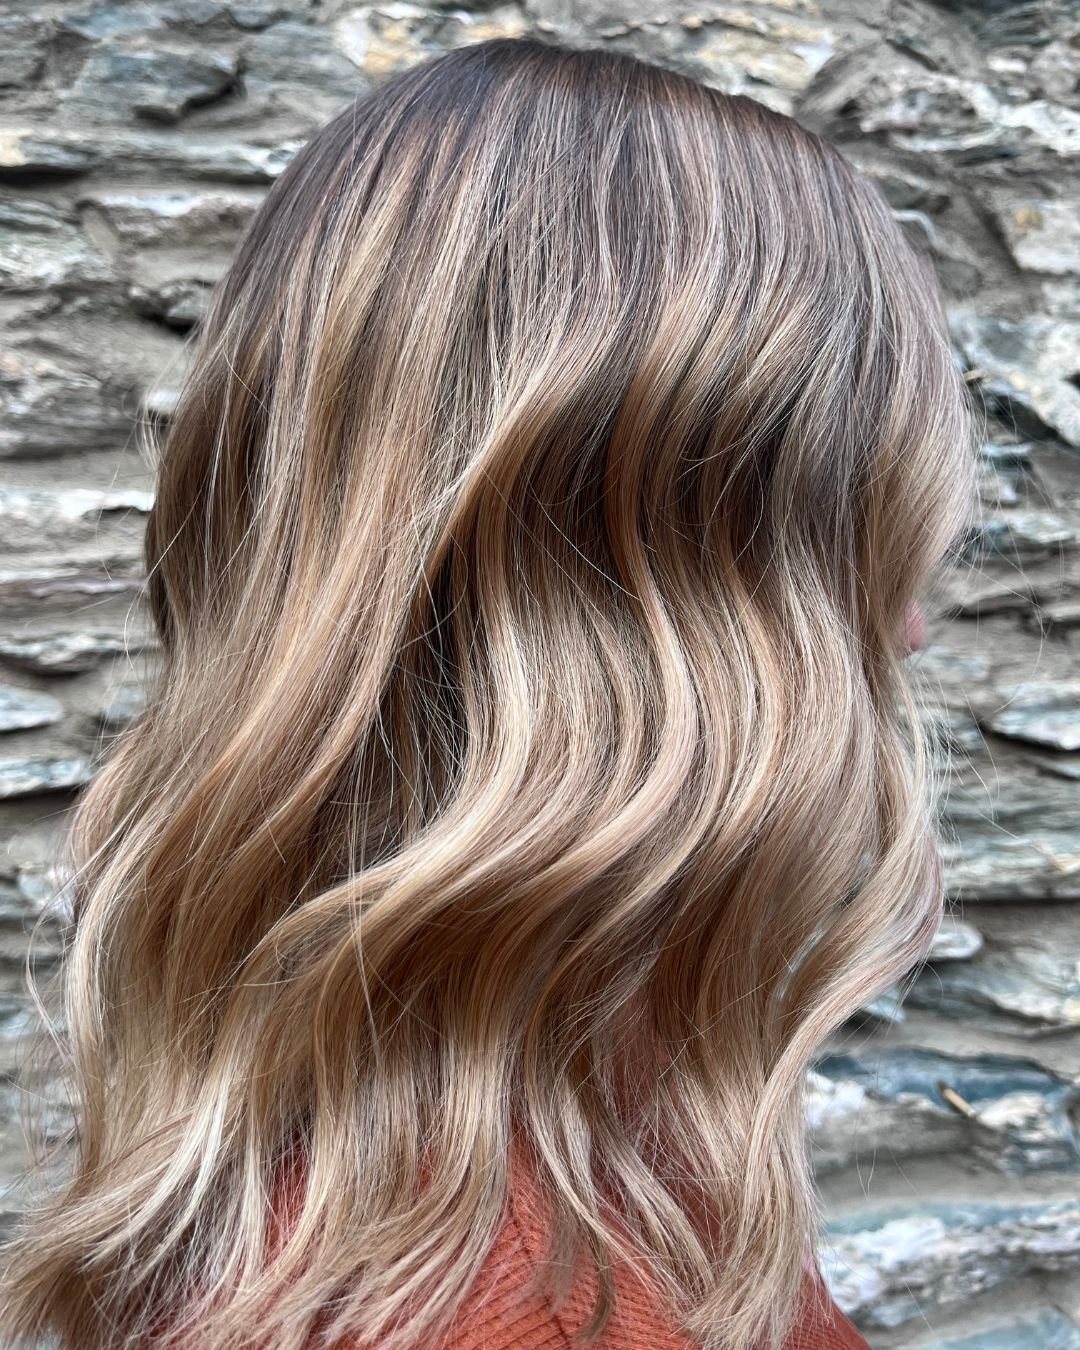 Turning heads with this stunning, glossy balayage created by Tyra 🍂🧡

Book your next Autumn hair appointment with Tyra at www.arrowtownhair.nz or call us on 03 442 0515 to book.

#balayage #haircolour #hairdresser #arrowtownhair #arrowtown #queenst